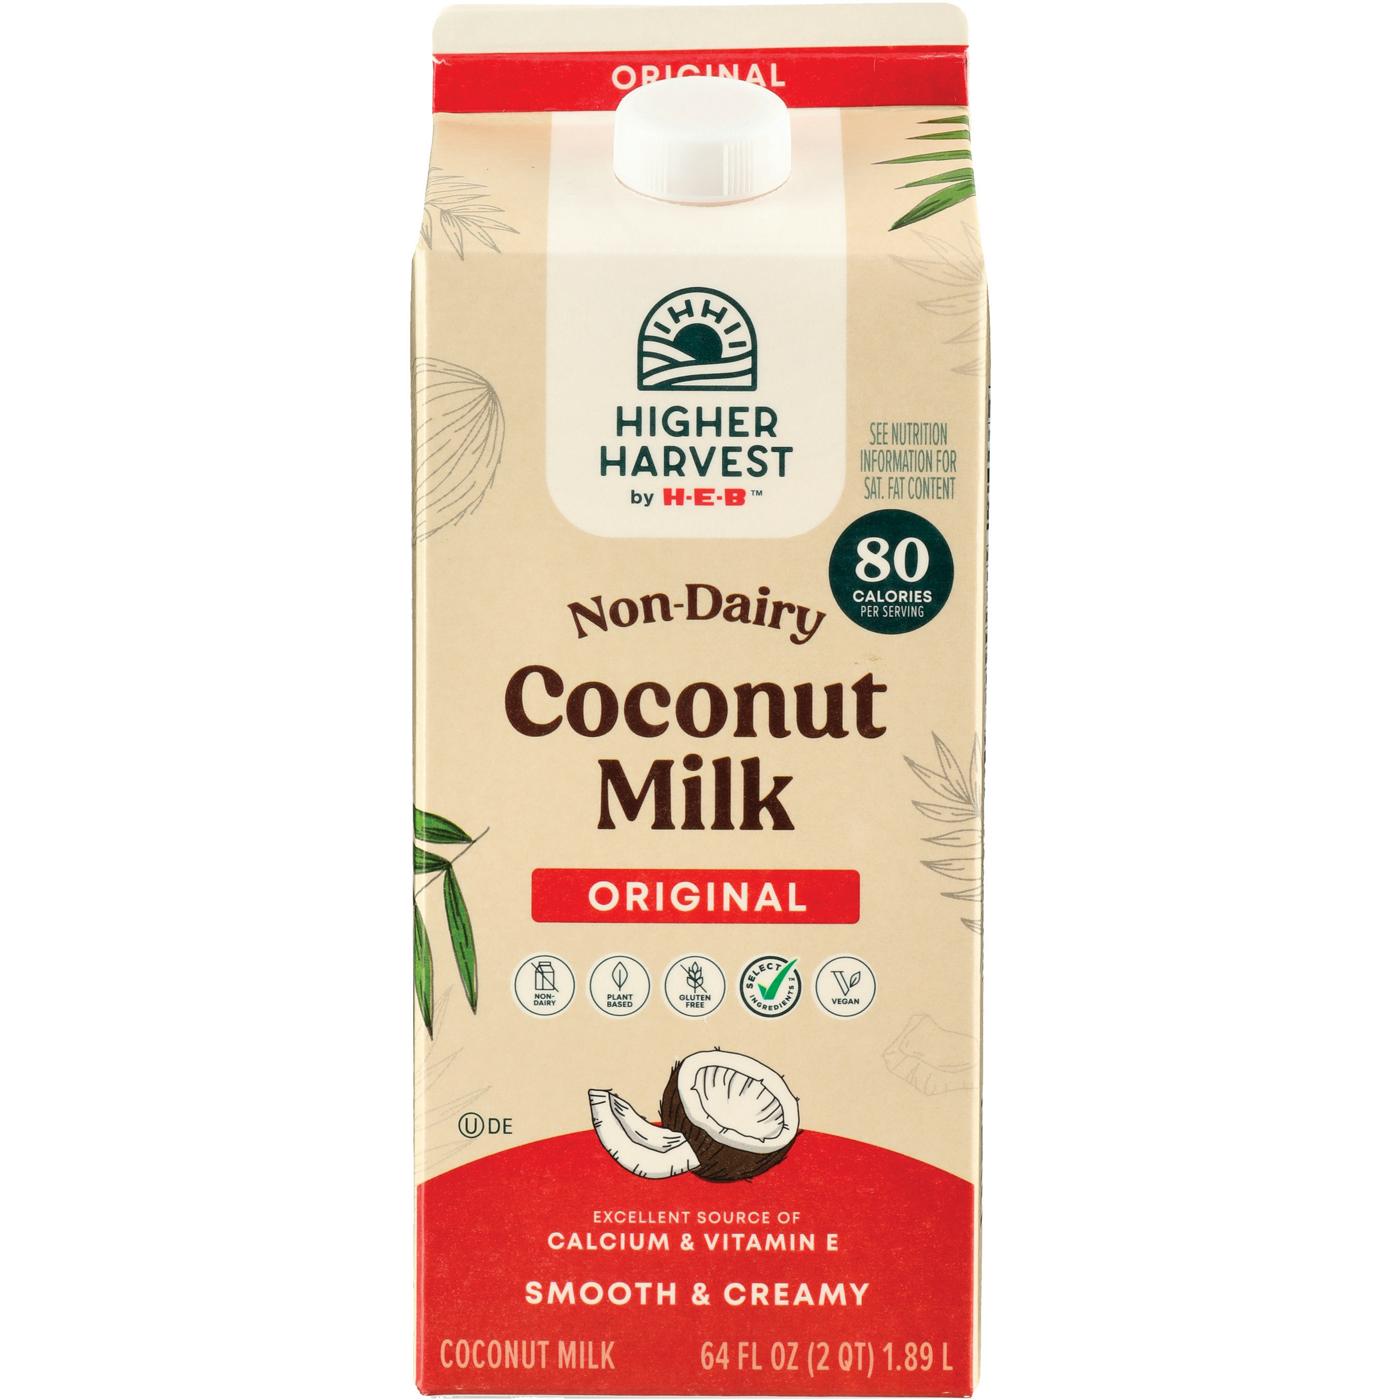 Higher Harvest by H-E-B Non-Dairy Coconut Milk – Original; image 1 of 2